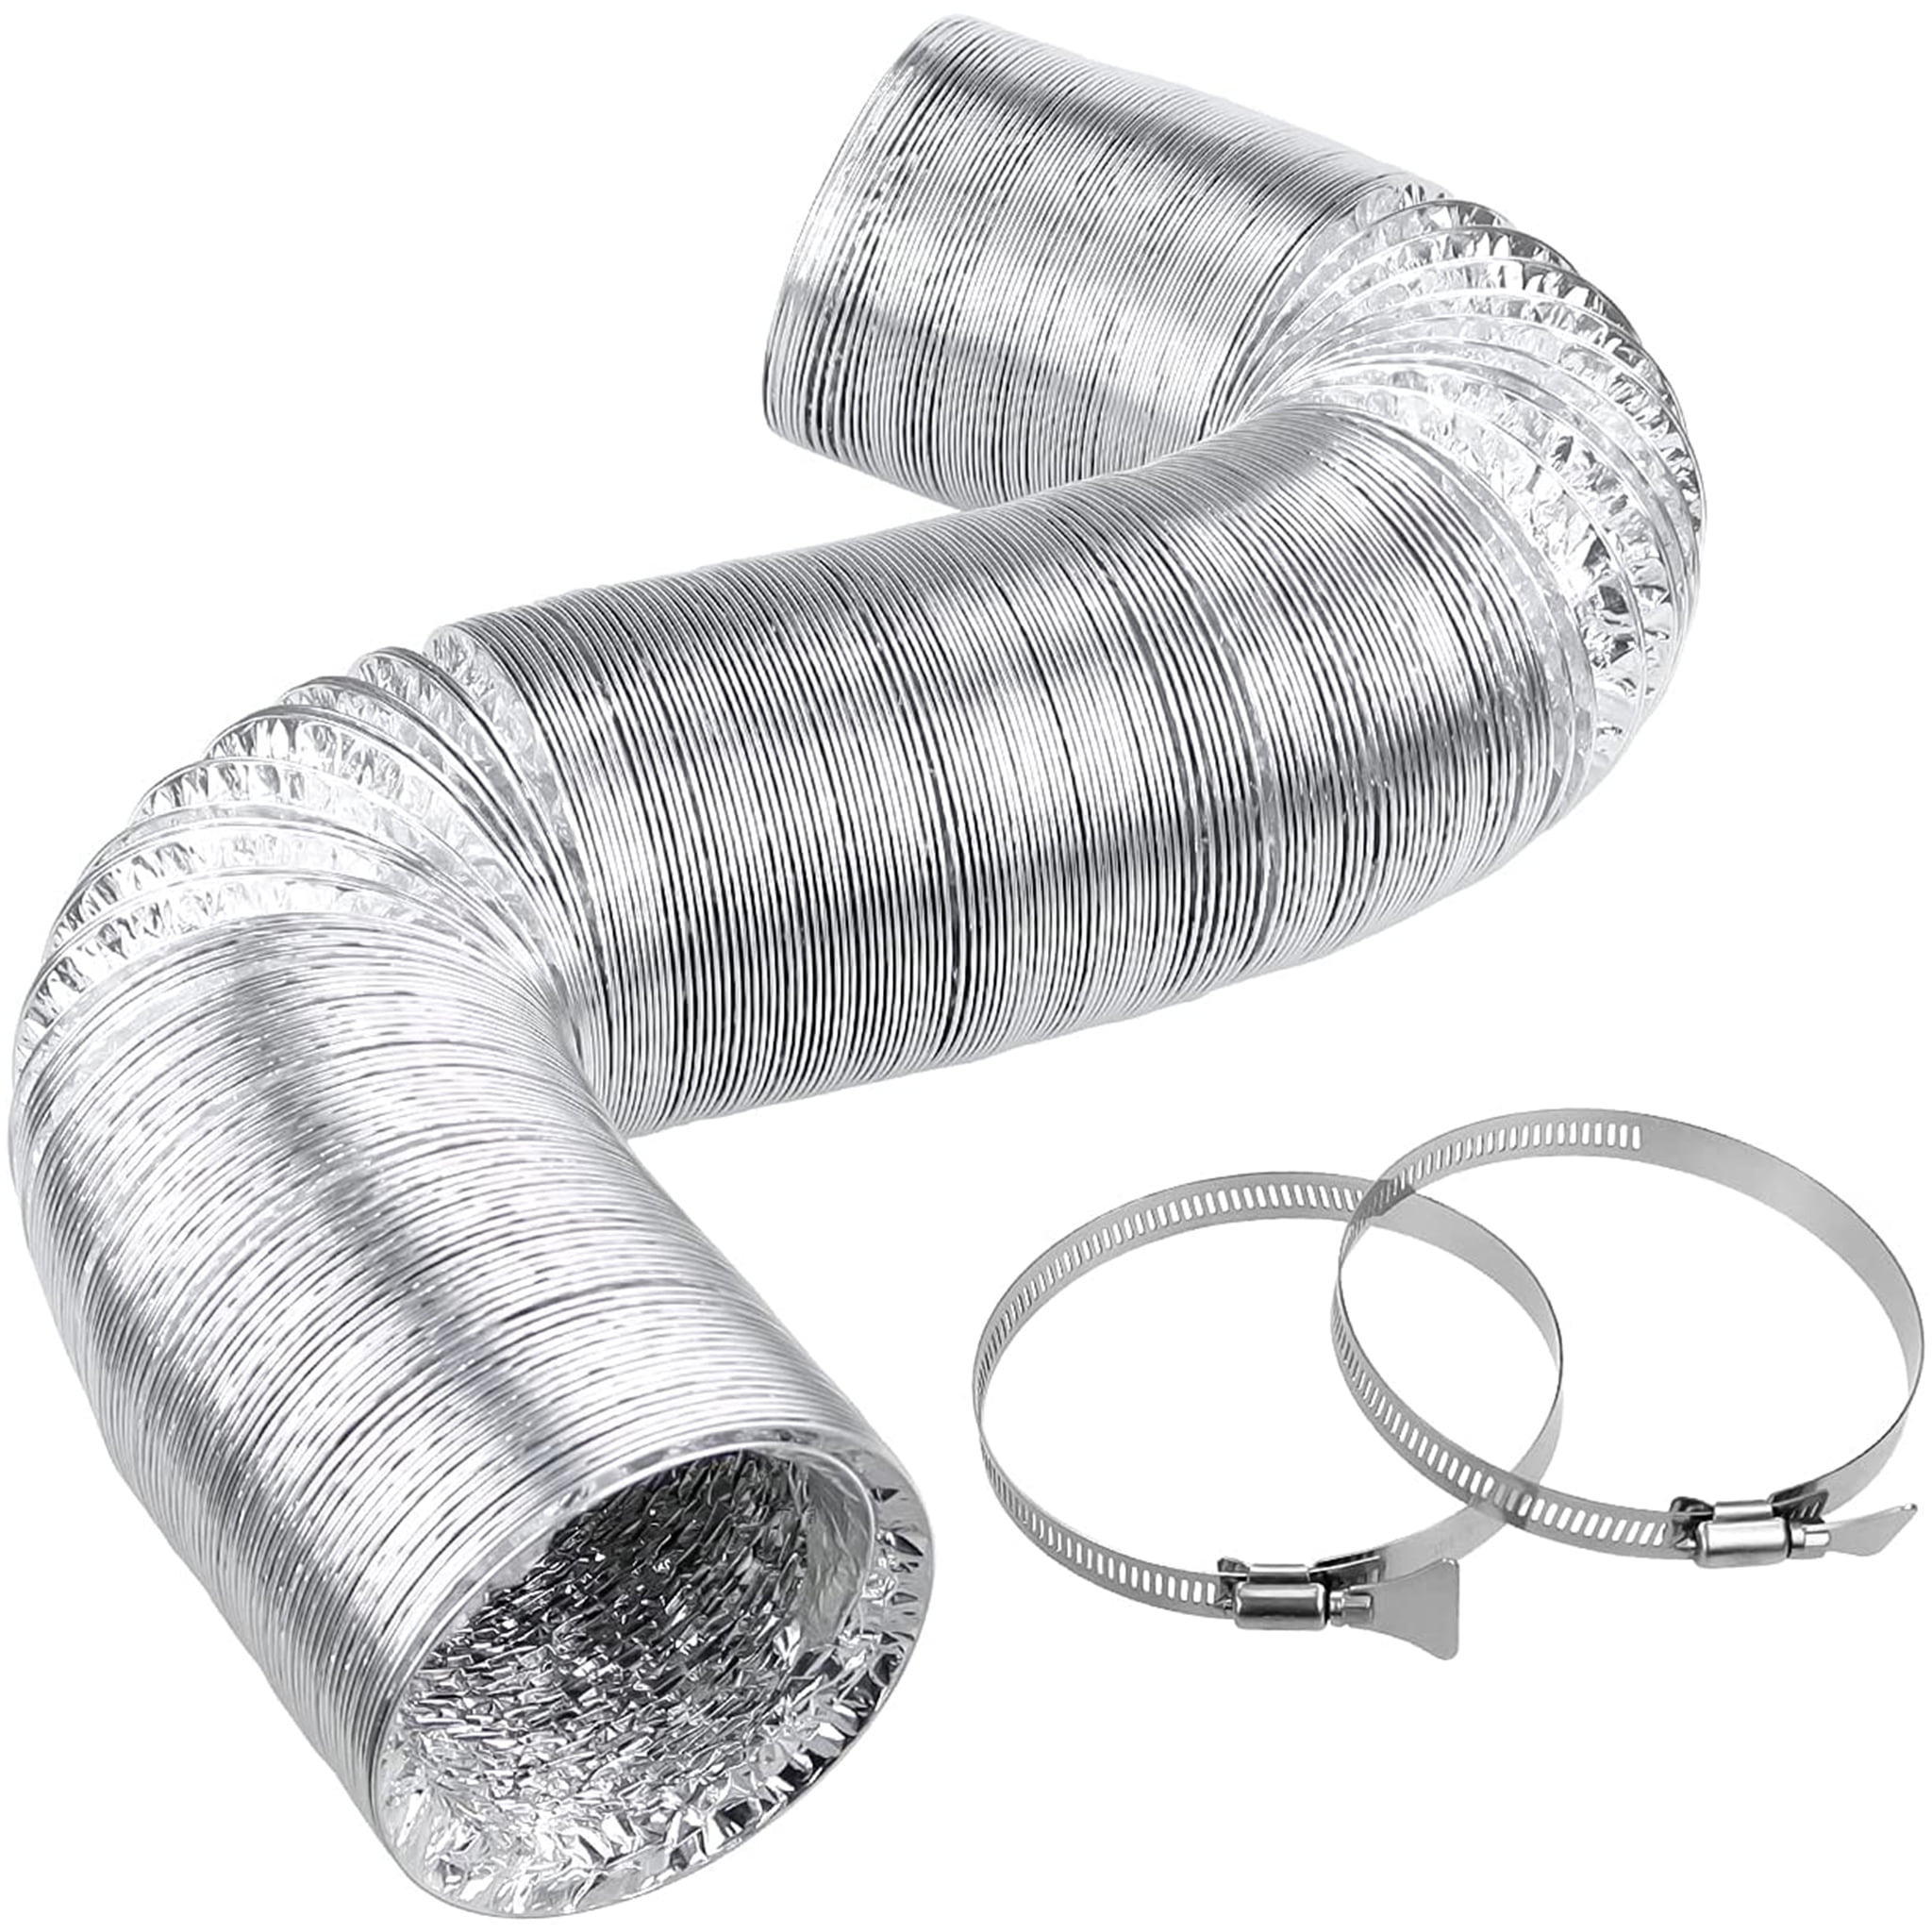 iPower 6" Inch Non-insulated Flexible Aluminum Air Ducting Dry Ventilation Hose 